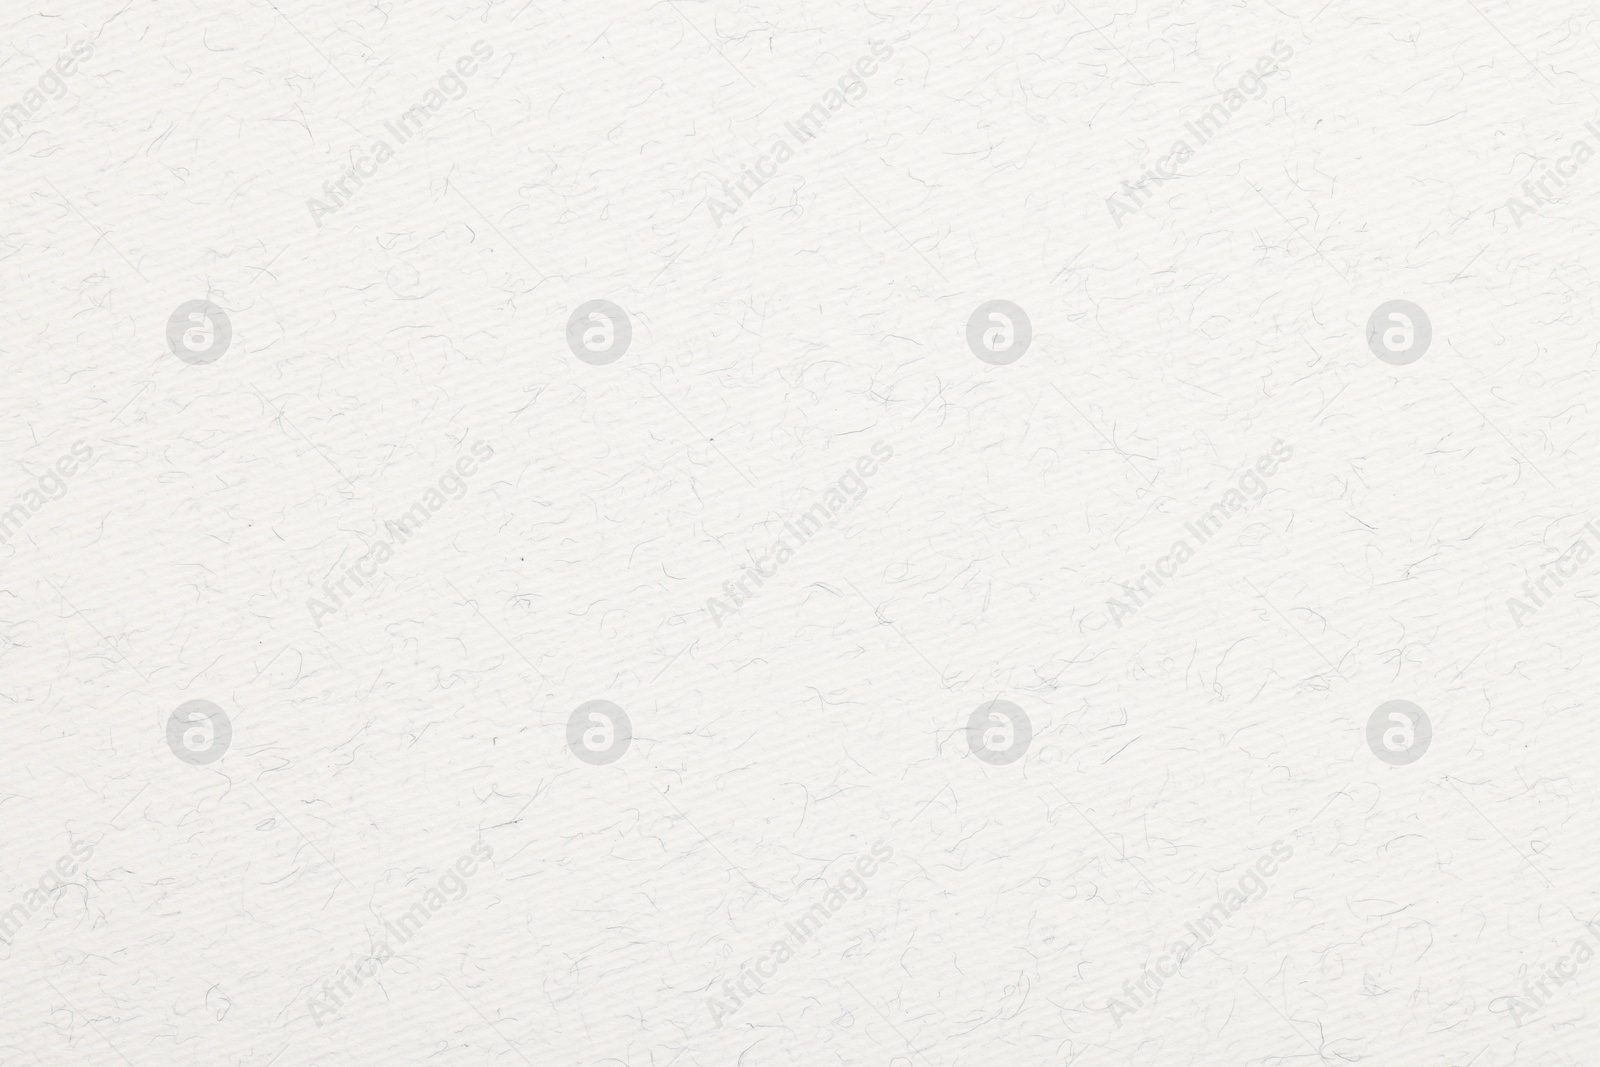 Photo of Texture of white paper sheet as background, top view